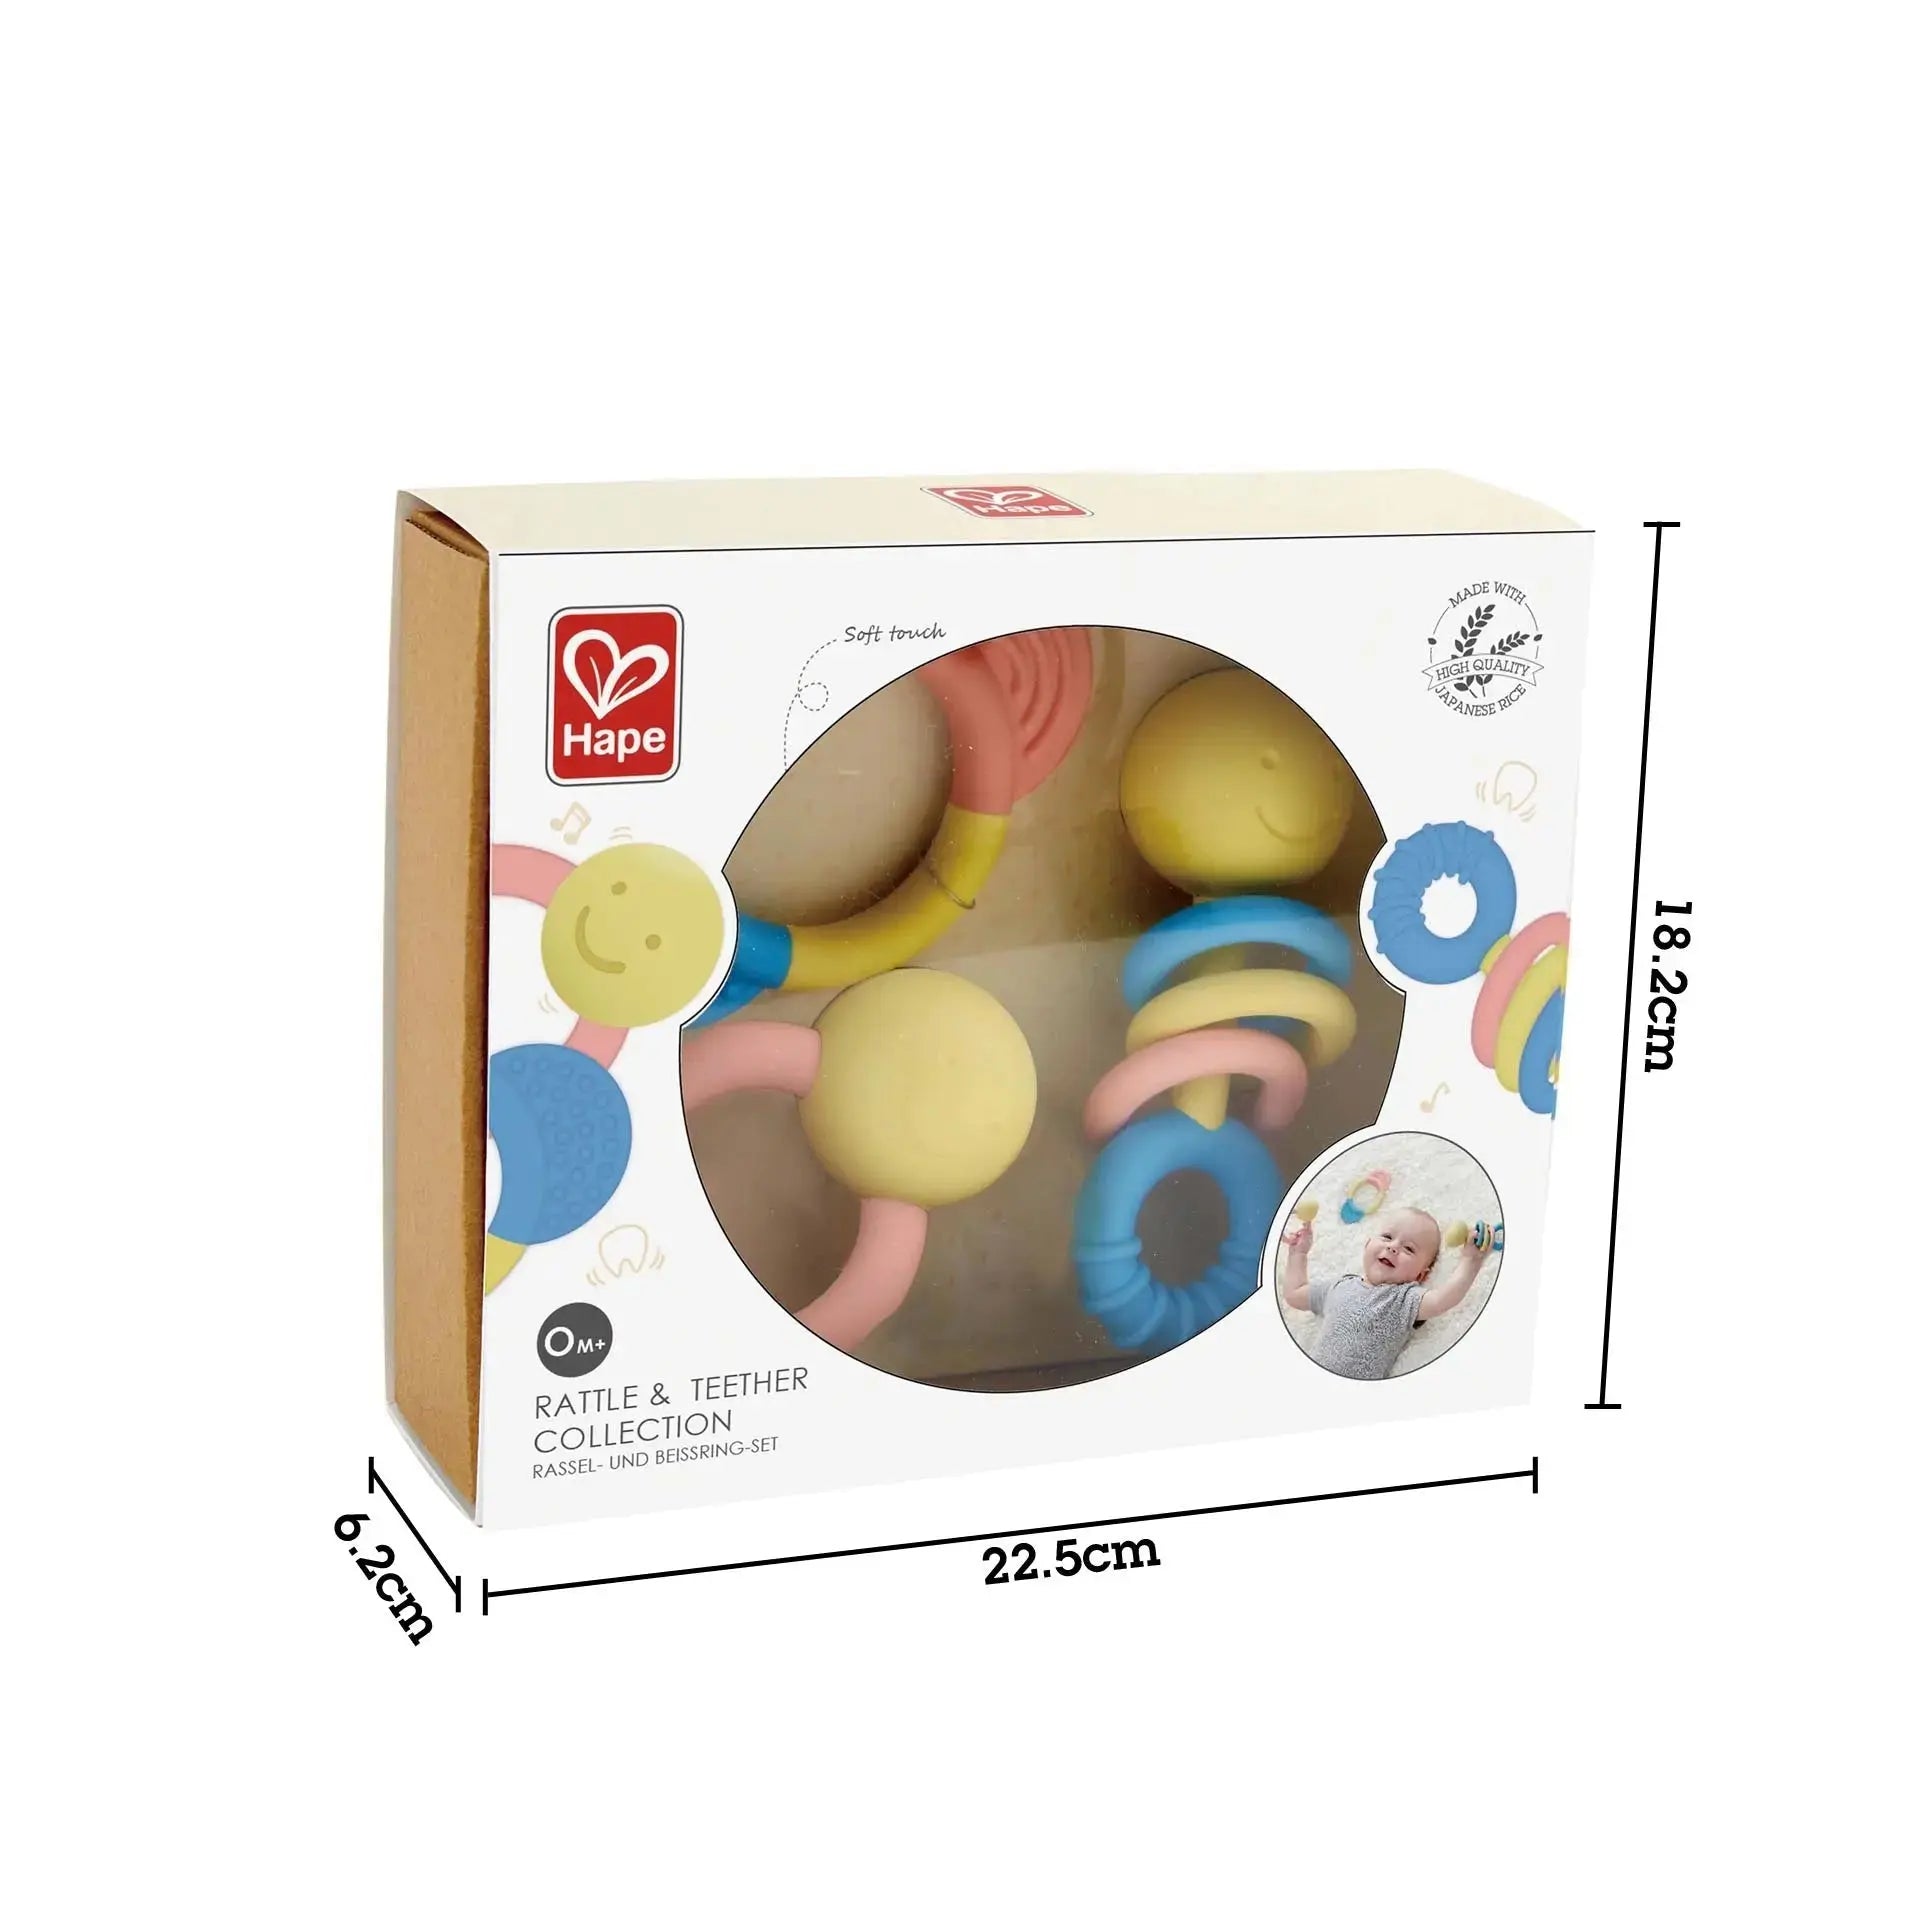 Hape, Stay-Put Rattle Set, 1 Each of 3 Designs, 3 inches Each, Mardel